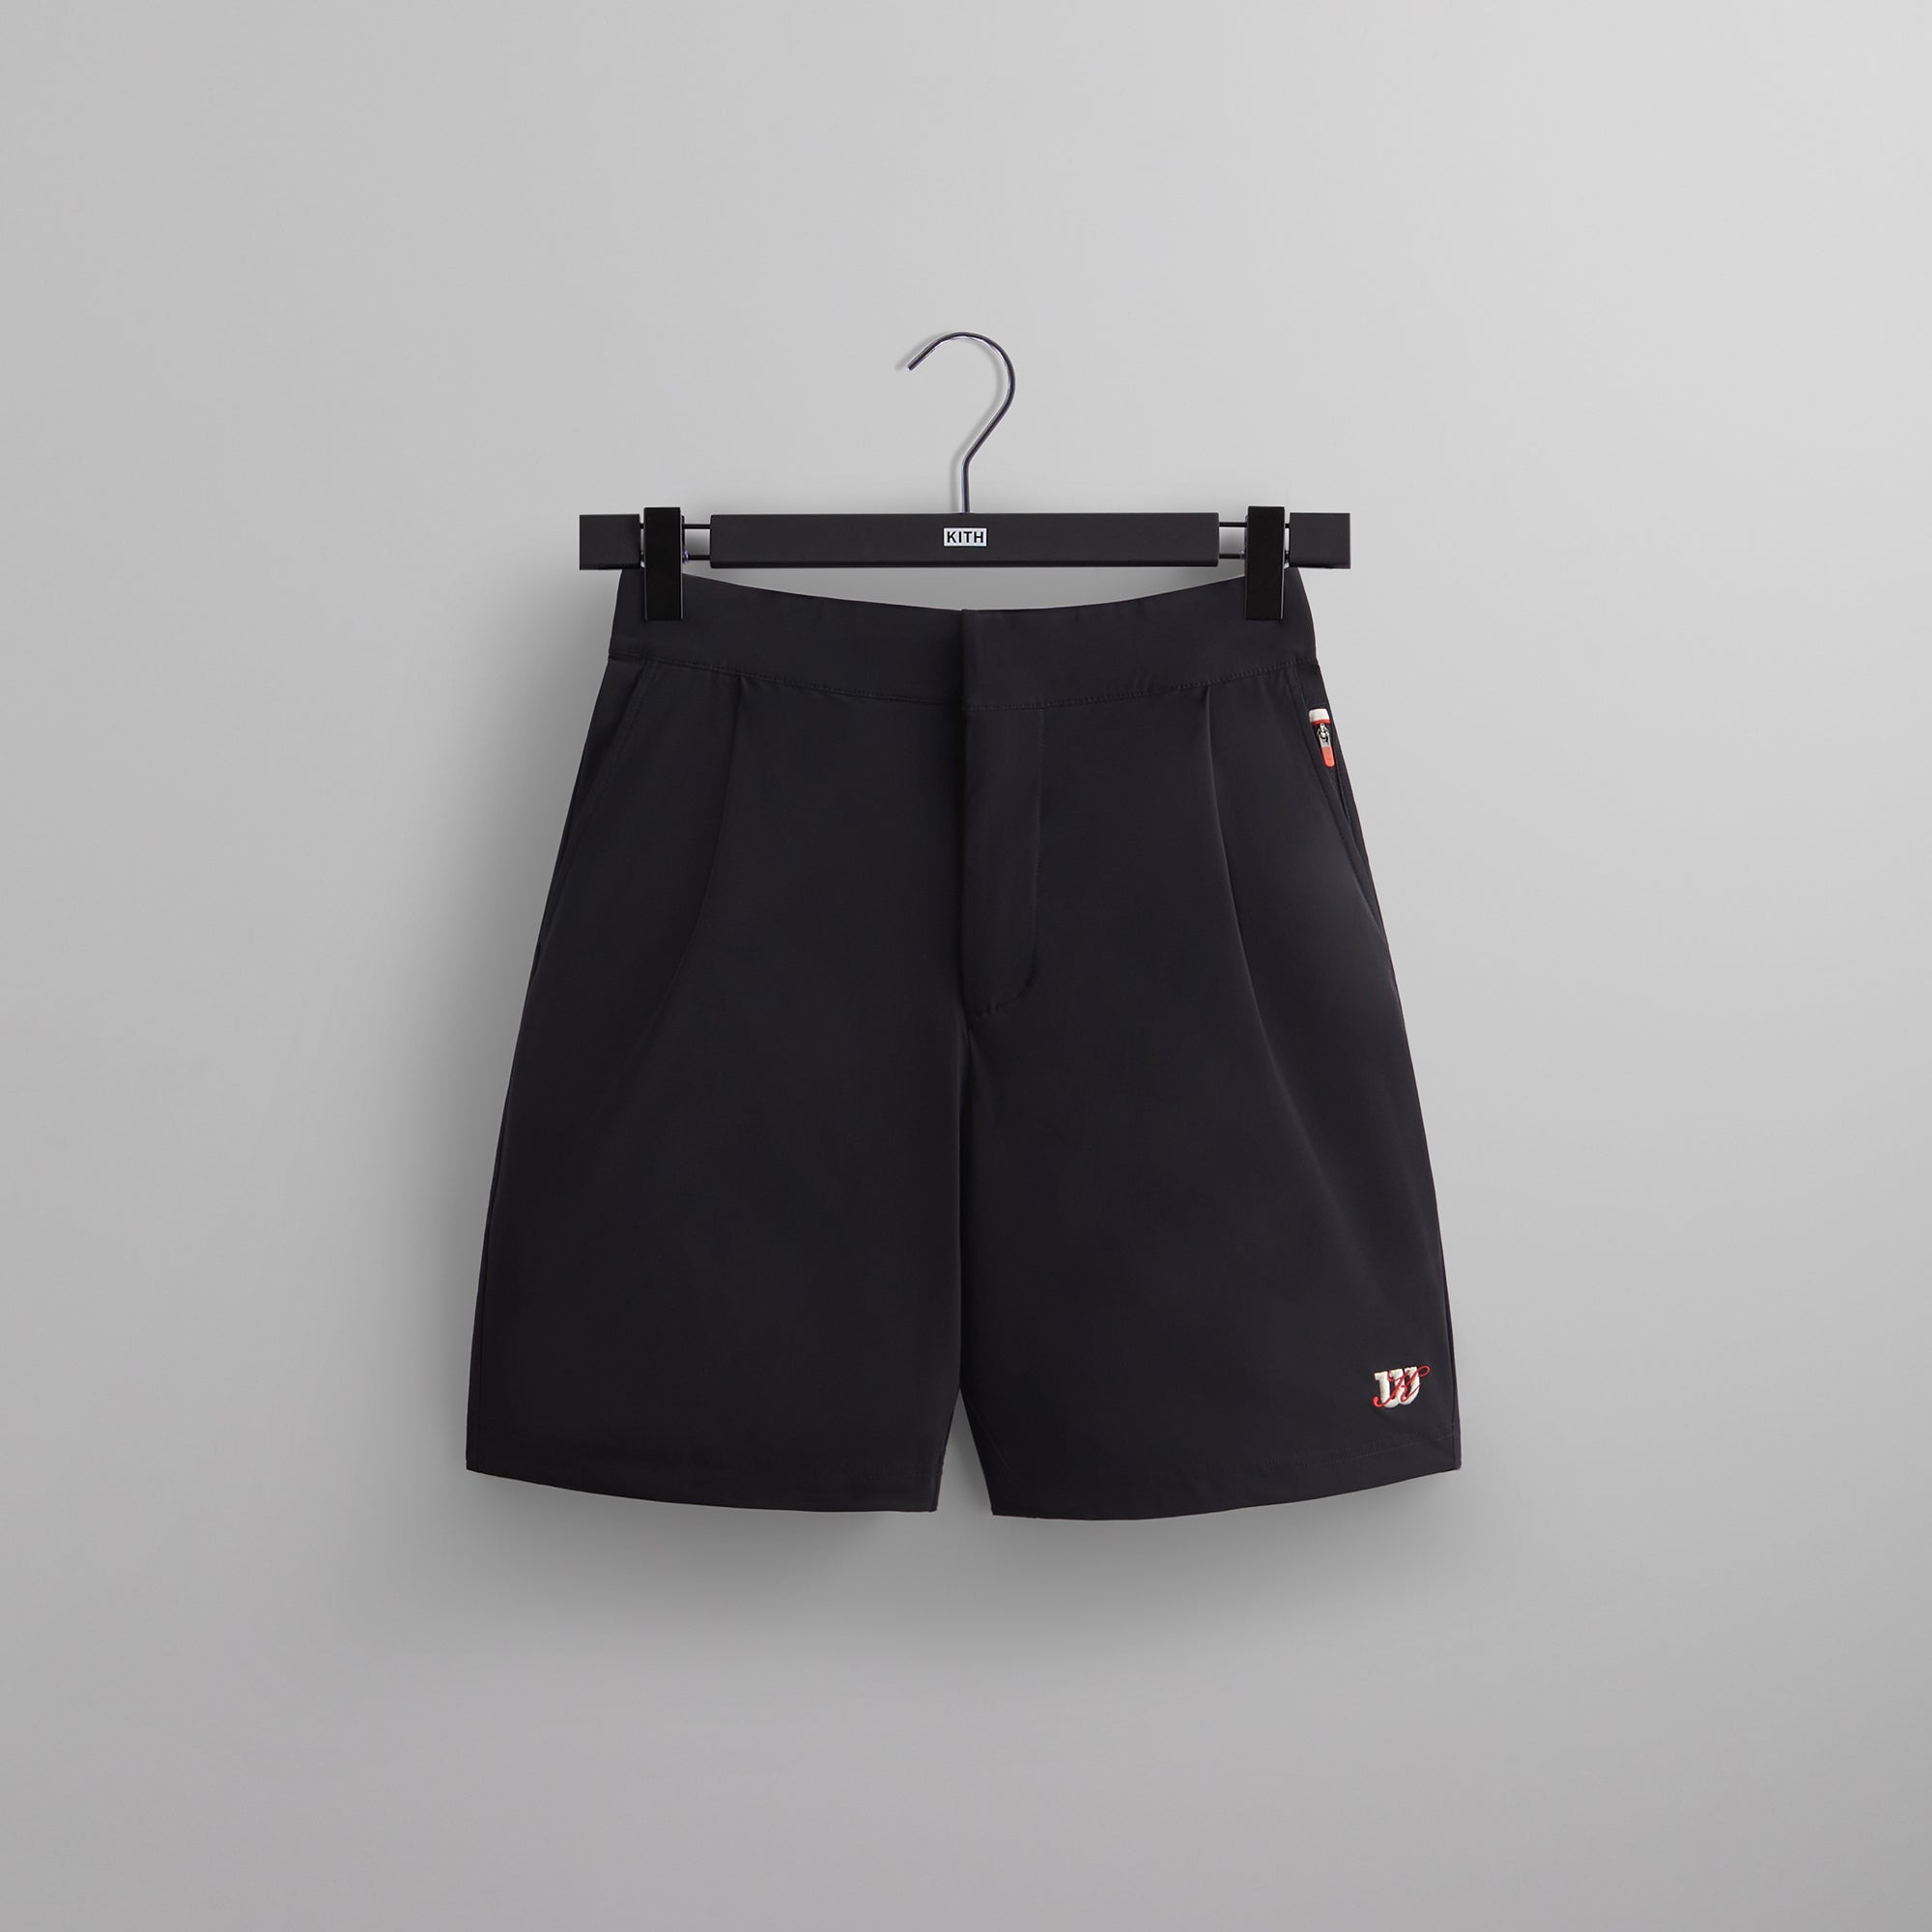 Kith for Wilson Midway Travel Short - Black